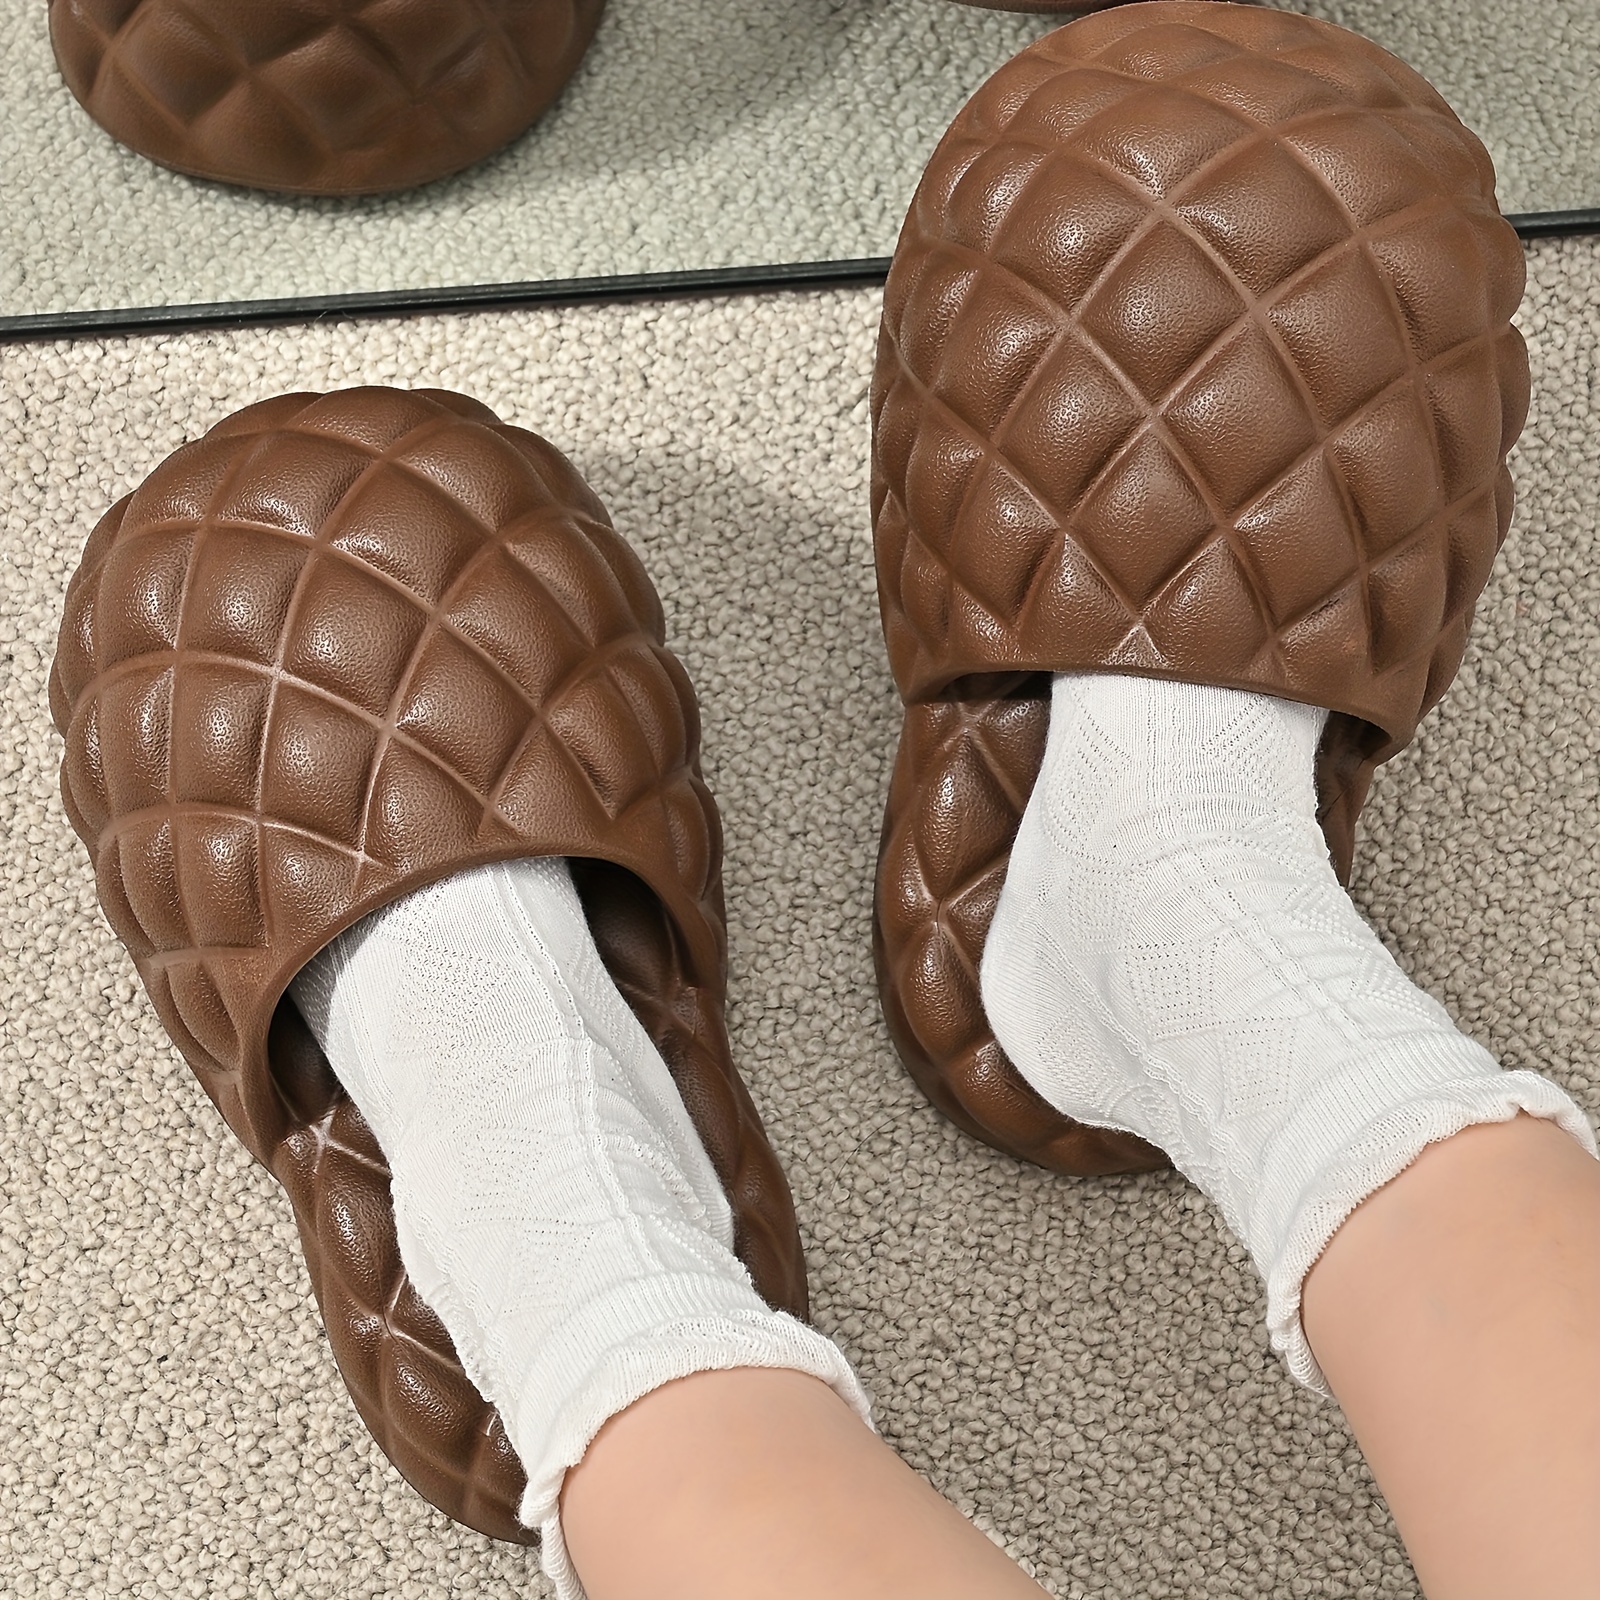 Women's Pineapple Shaped Novelty Slippers, Closed Round Toe Funny